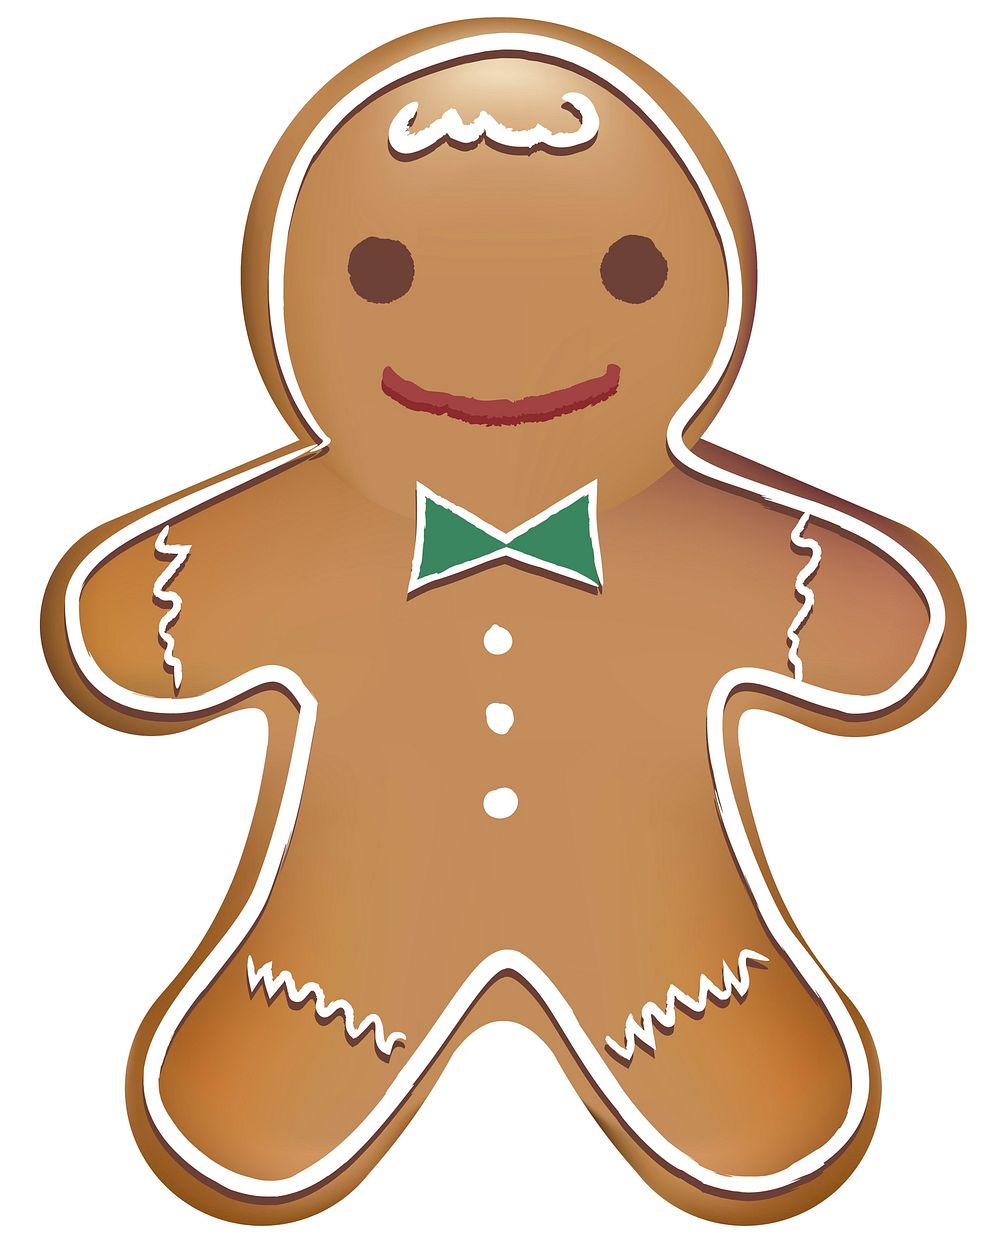 Illustration of gingerbread cookie